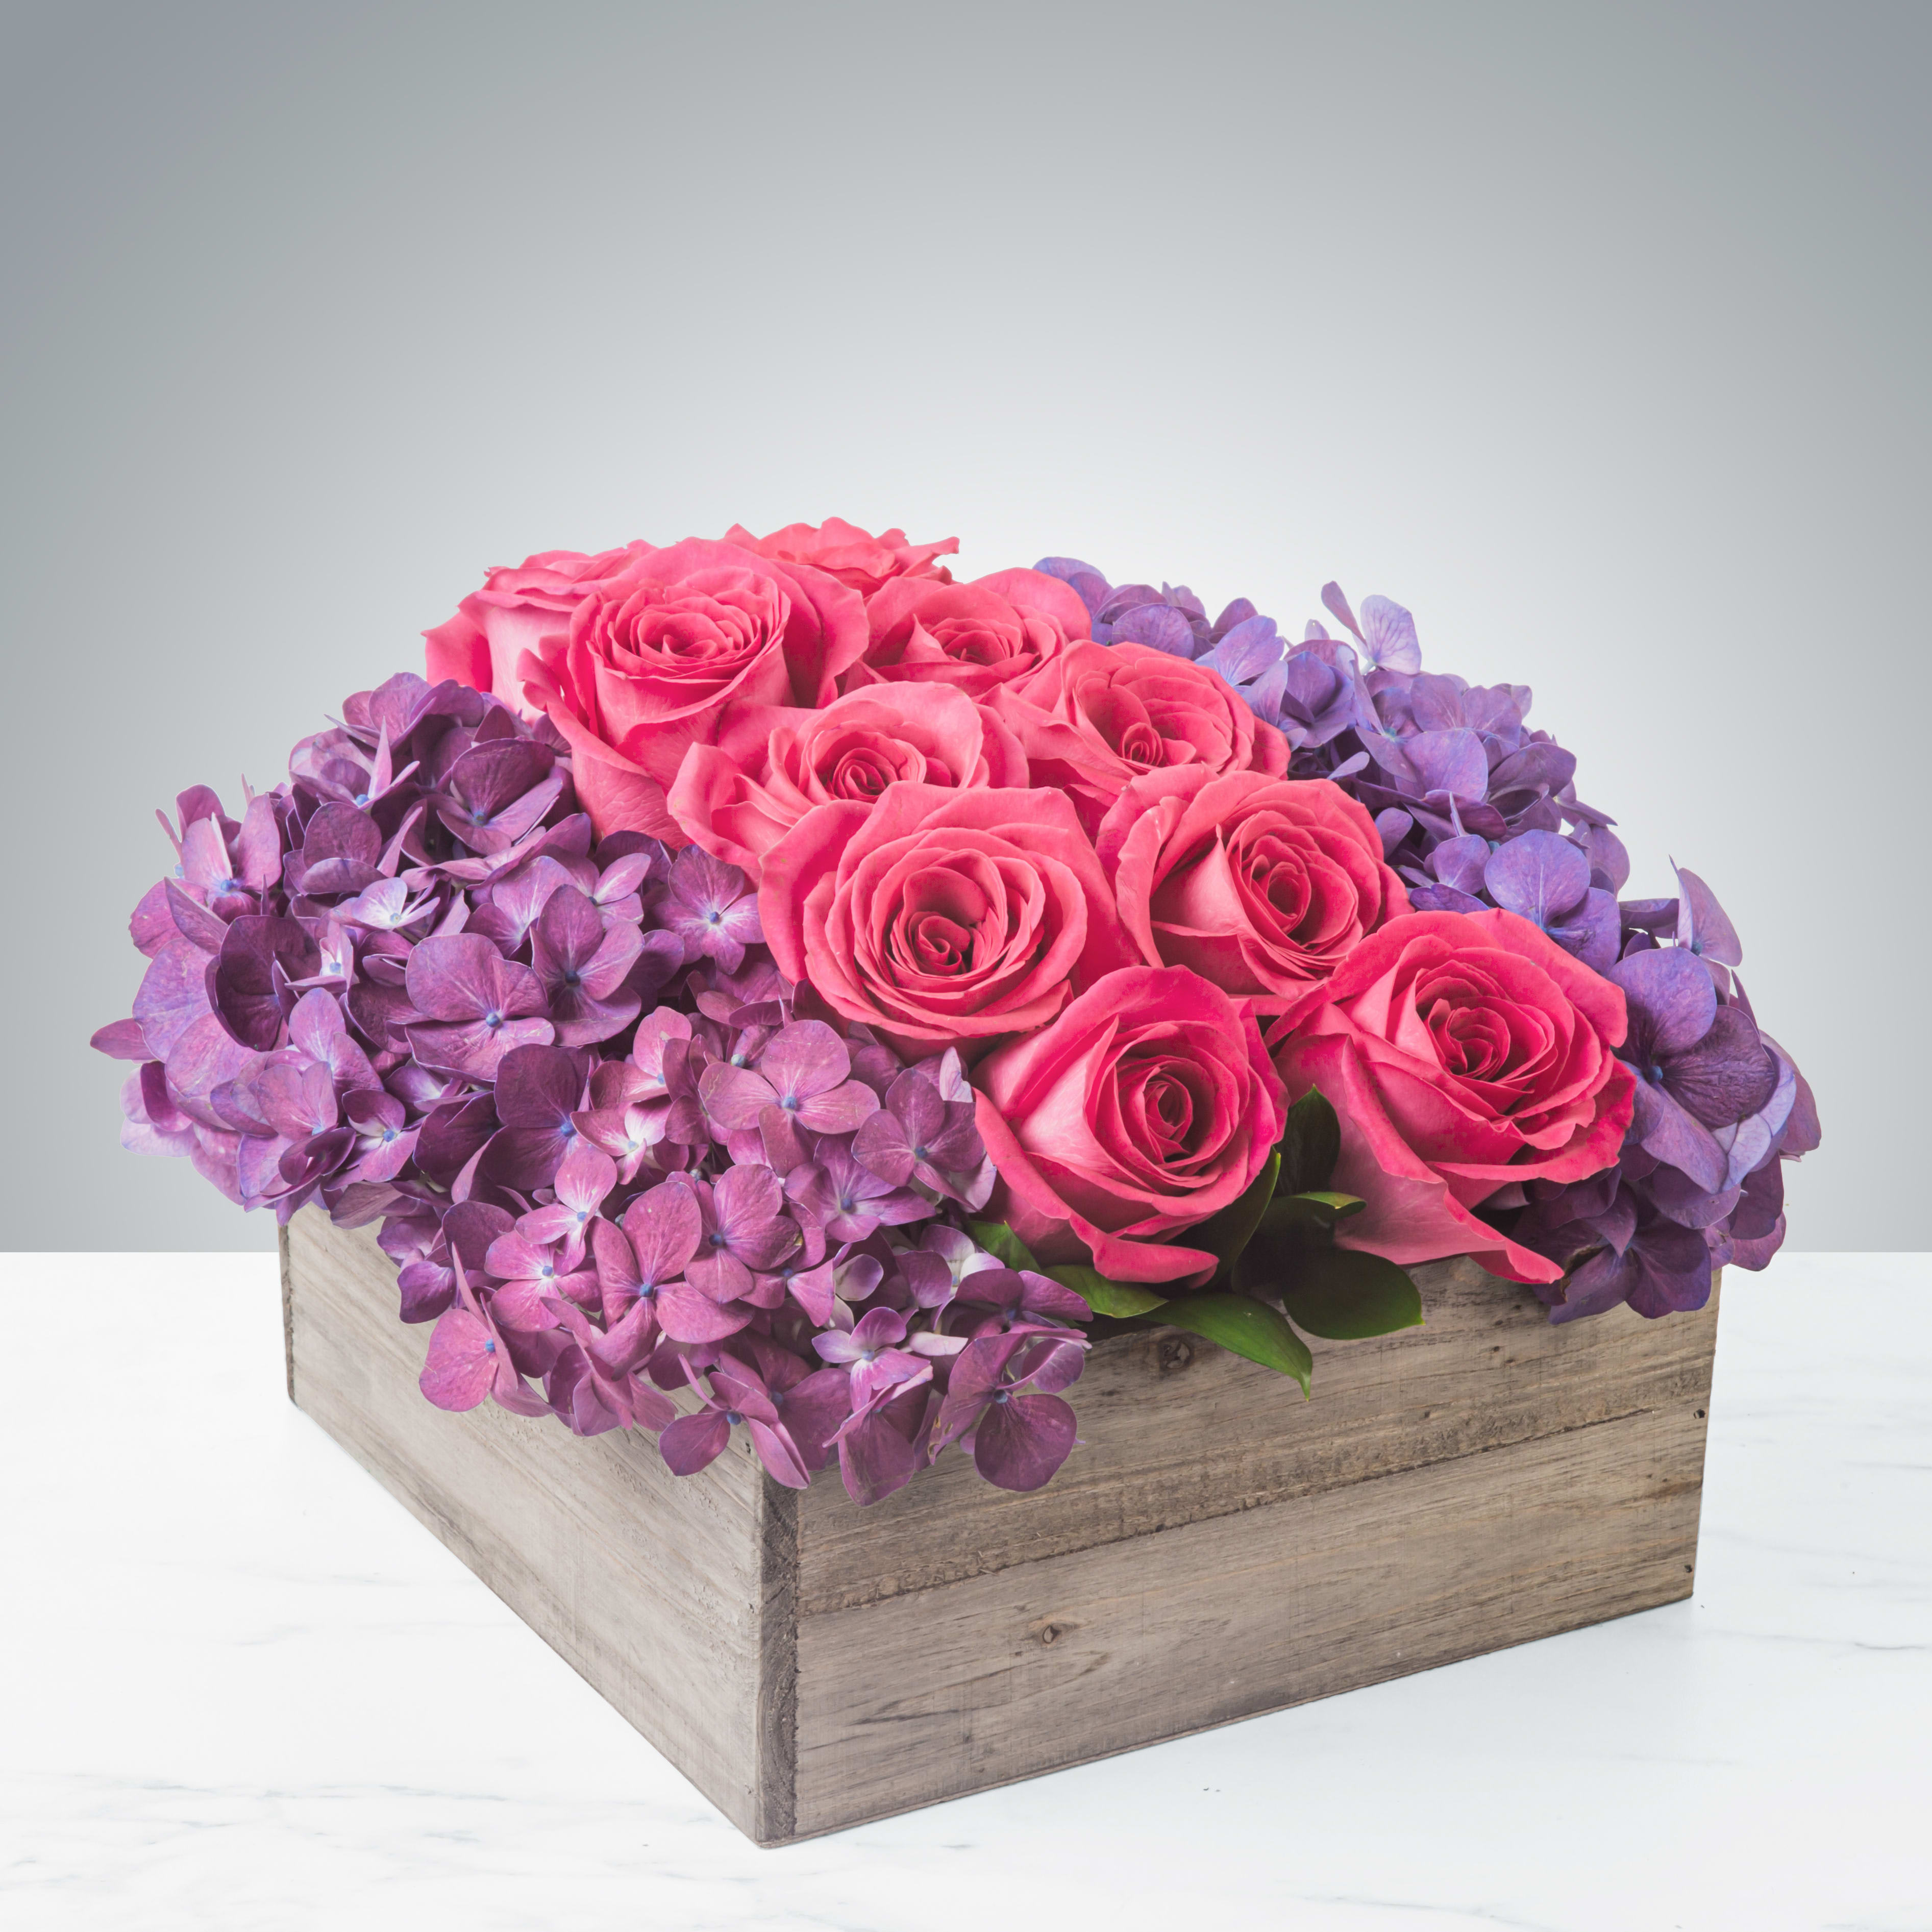 Modern Class by BloomNation™ - This large flower box is a full statement and brings color to any room. Featuring roses, hydrangeas and other flowers, the lines of the arrangement make it as chic as the vibrant colors make it dramatic.   APPROXIMATE DIMENSIONS 12&quot; W X 12&quot; L X 6&quot; H